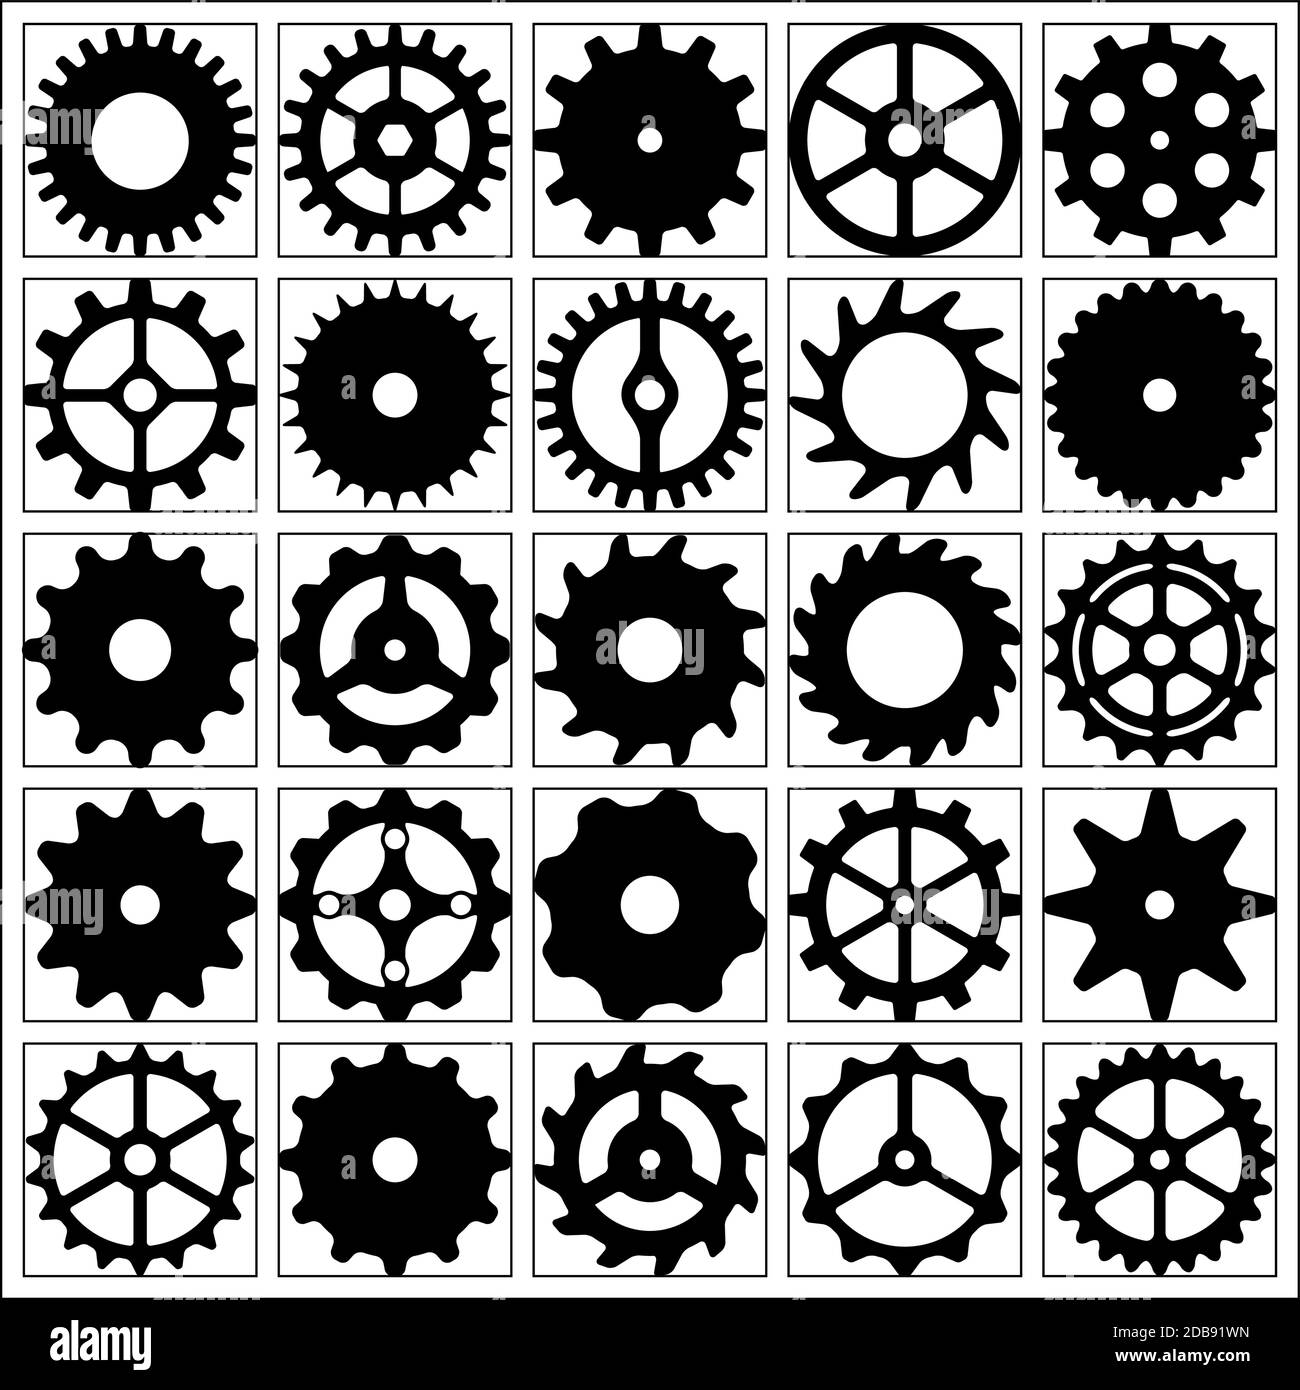 Set of gear wheels for desing. Stock Vector